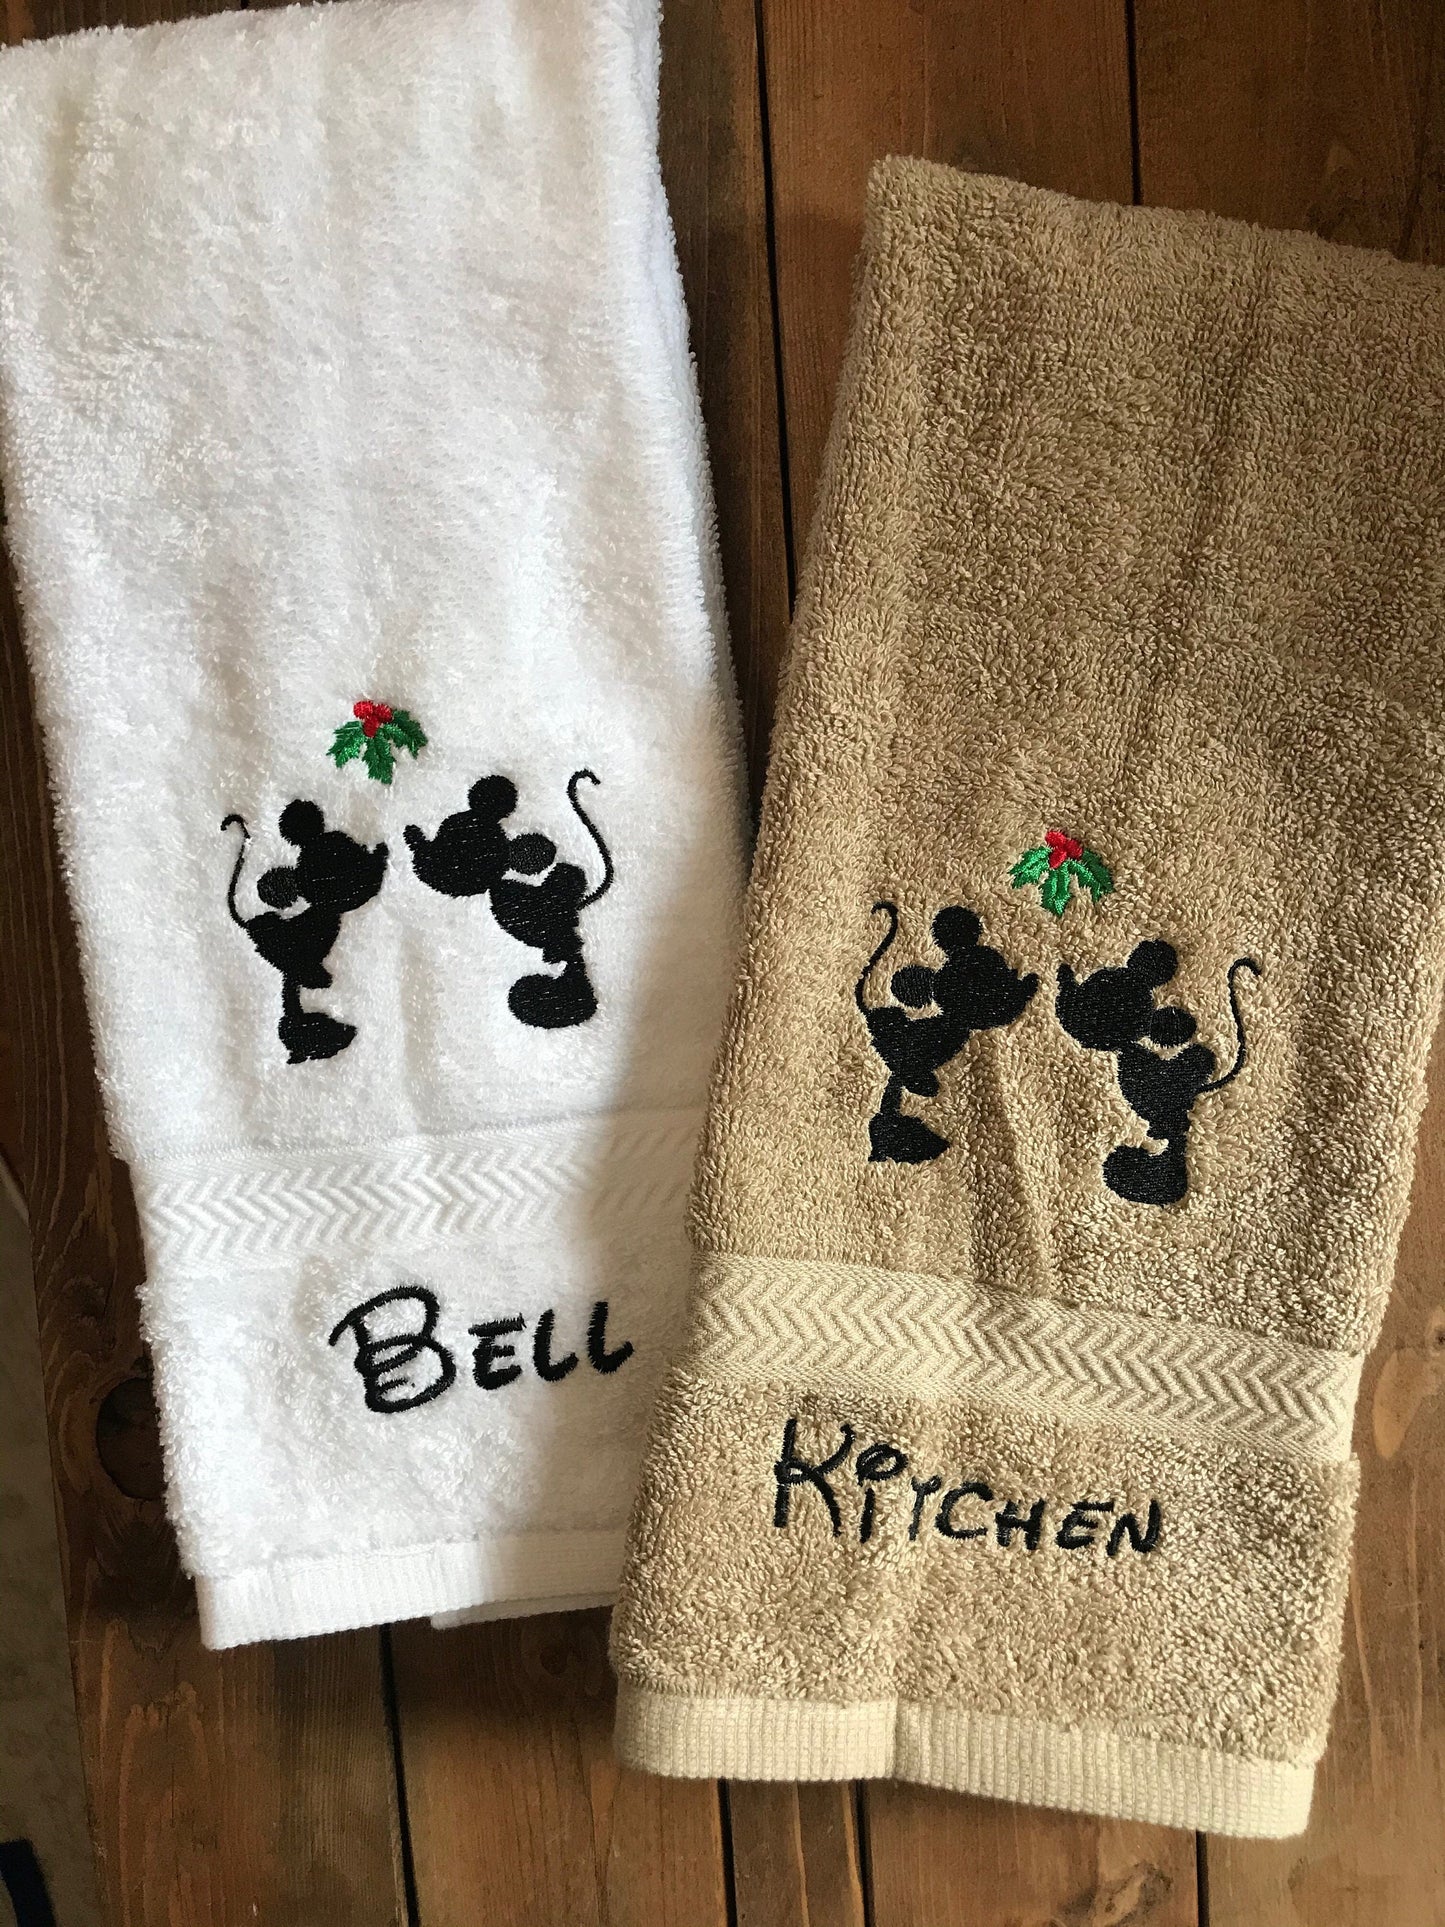 Disney Christmas Personalized Bathroom Hand Towels -Cotton- Embroidered-Choose your Design and Colors - Bath Towel